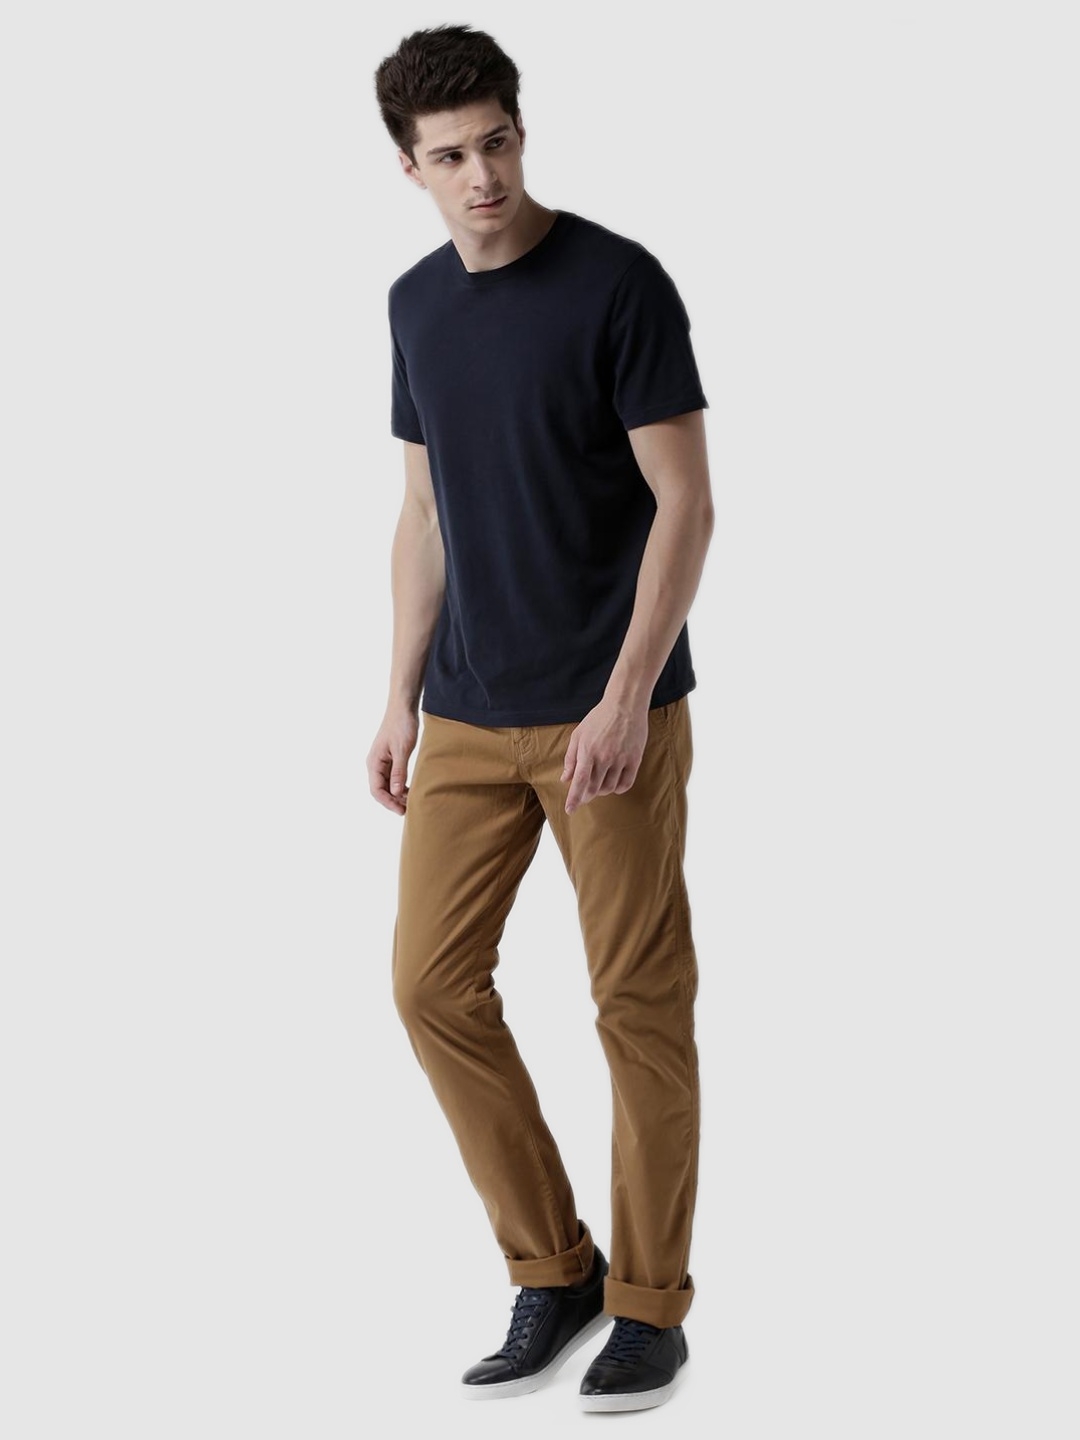 Straight Fit Cotton Blend Brown Trouser